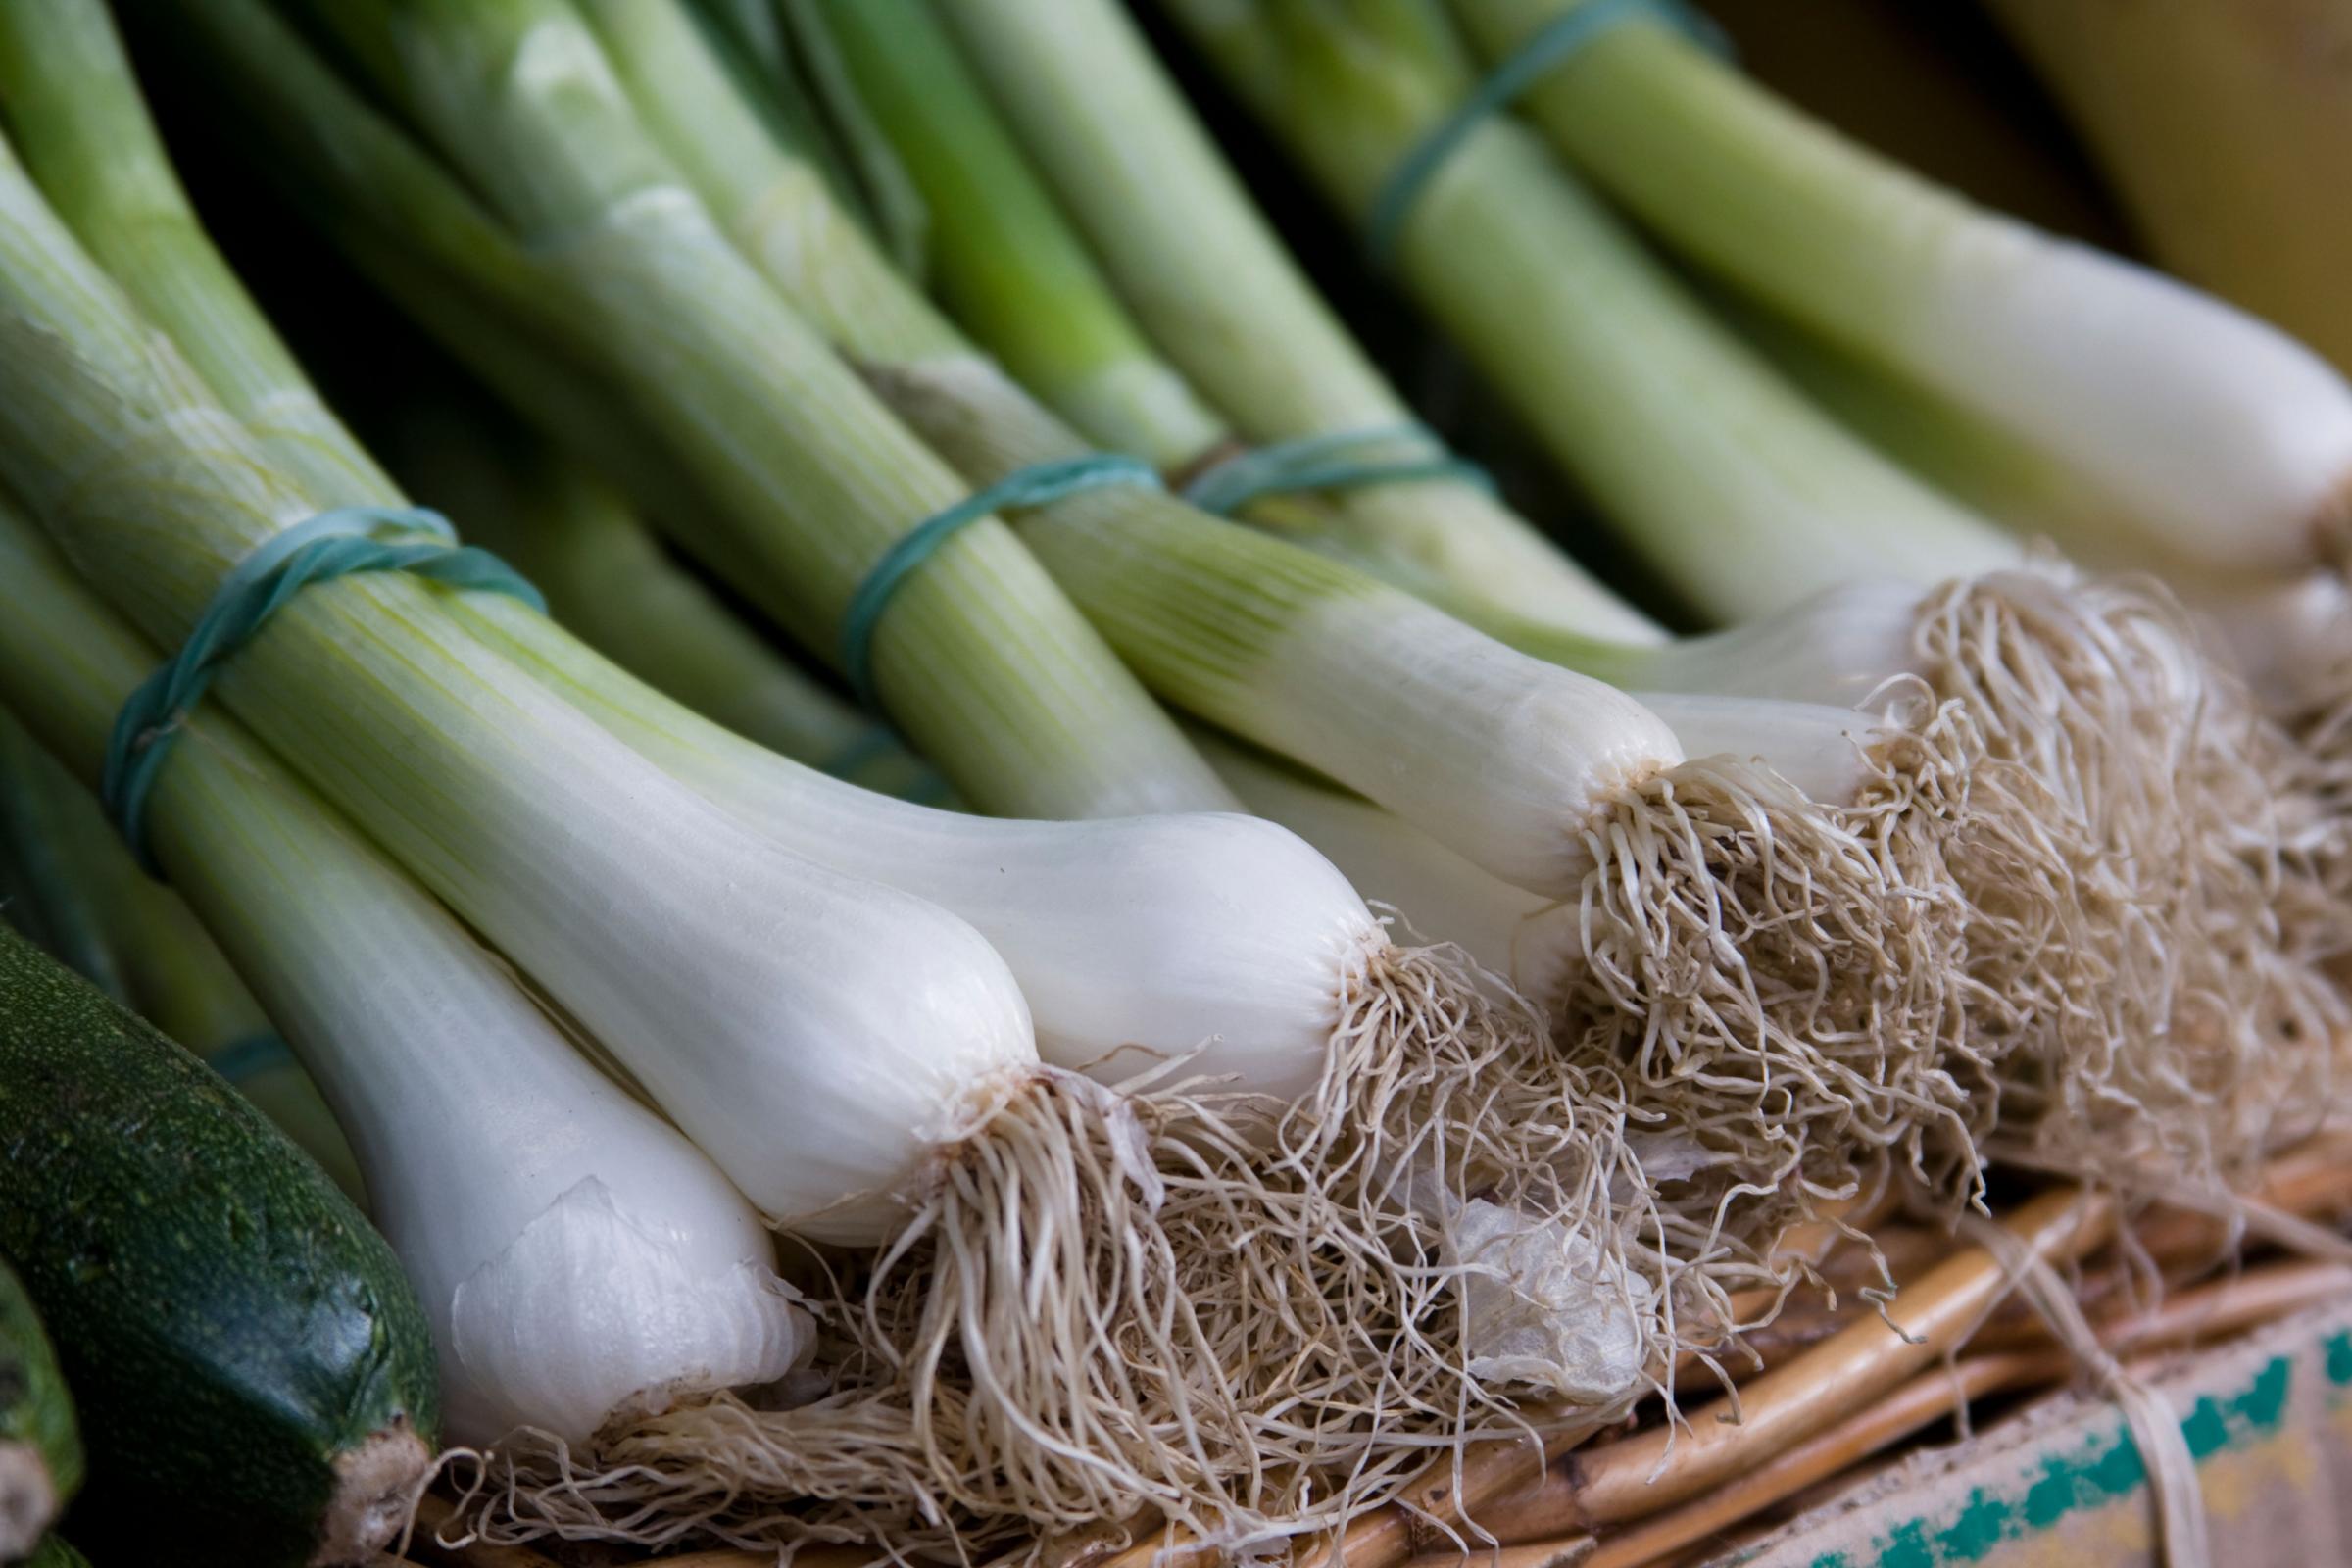 Spring onions grown from home Picture credit: Alamy/PA